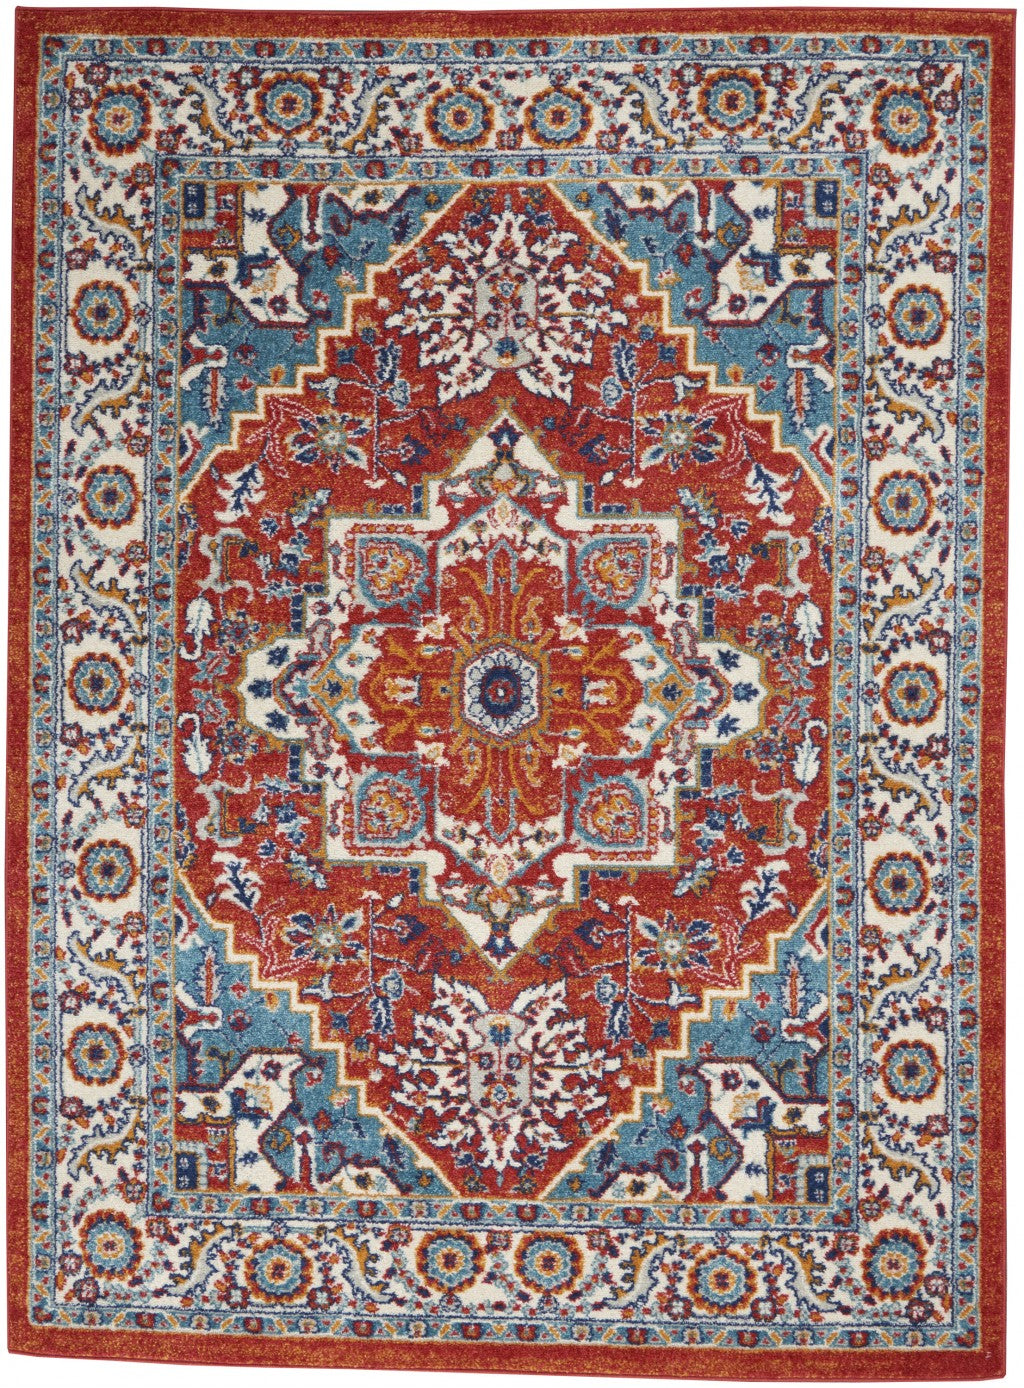 5’ X 7’ Red And Ivory Medallion Area Rug